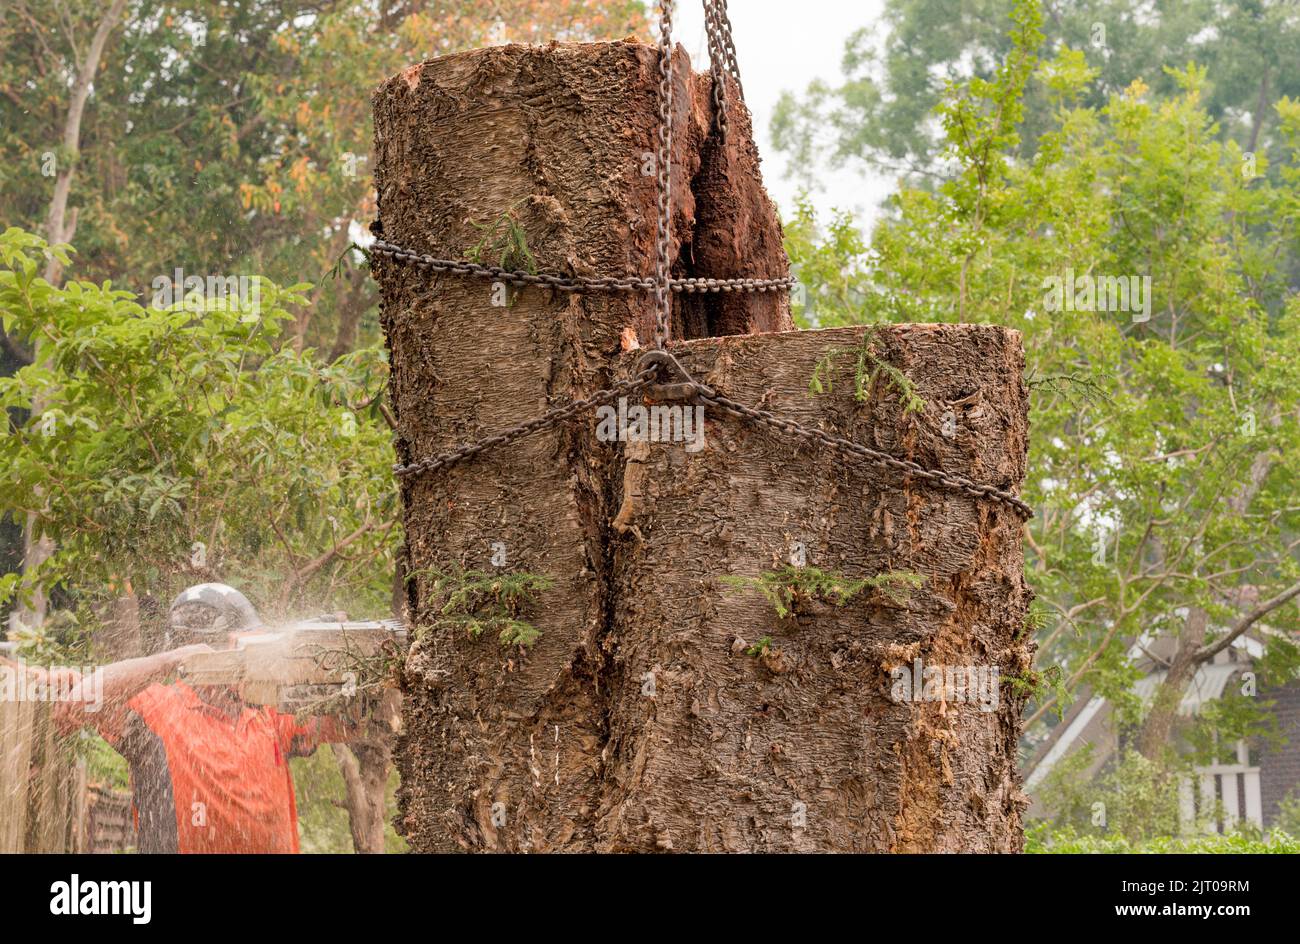 The trunk of a large Hoop Pine tree is chained and cut with a chainsaw. The tree was deemed unsafe after damage from a sudden wind storm. Stock Photo